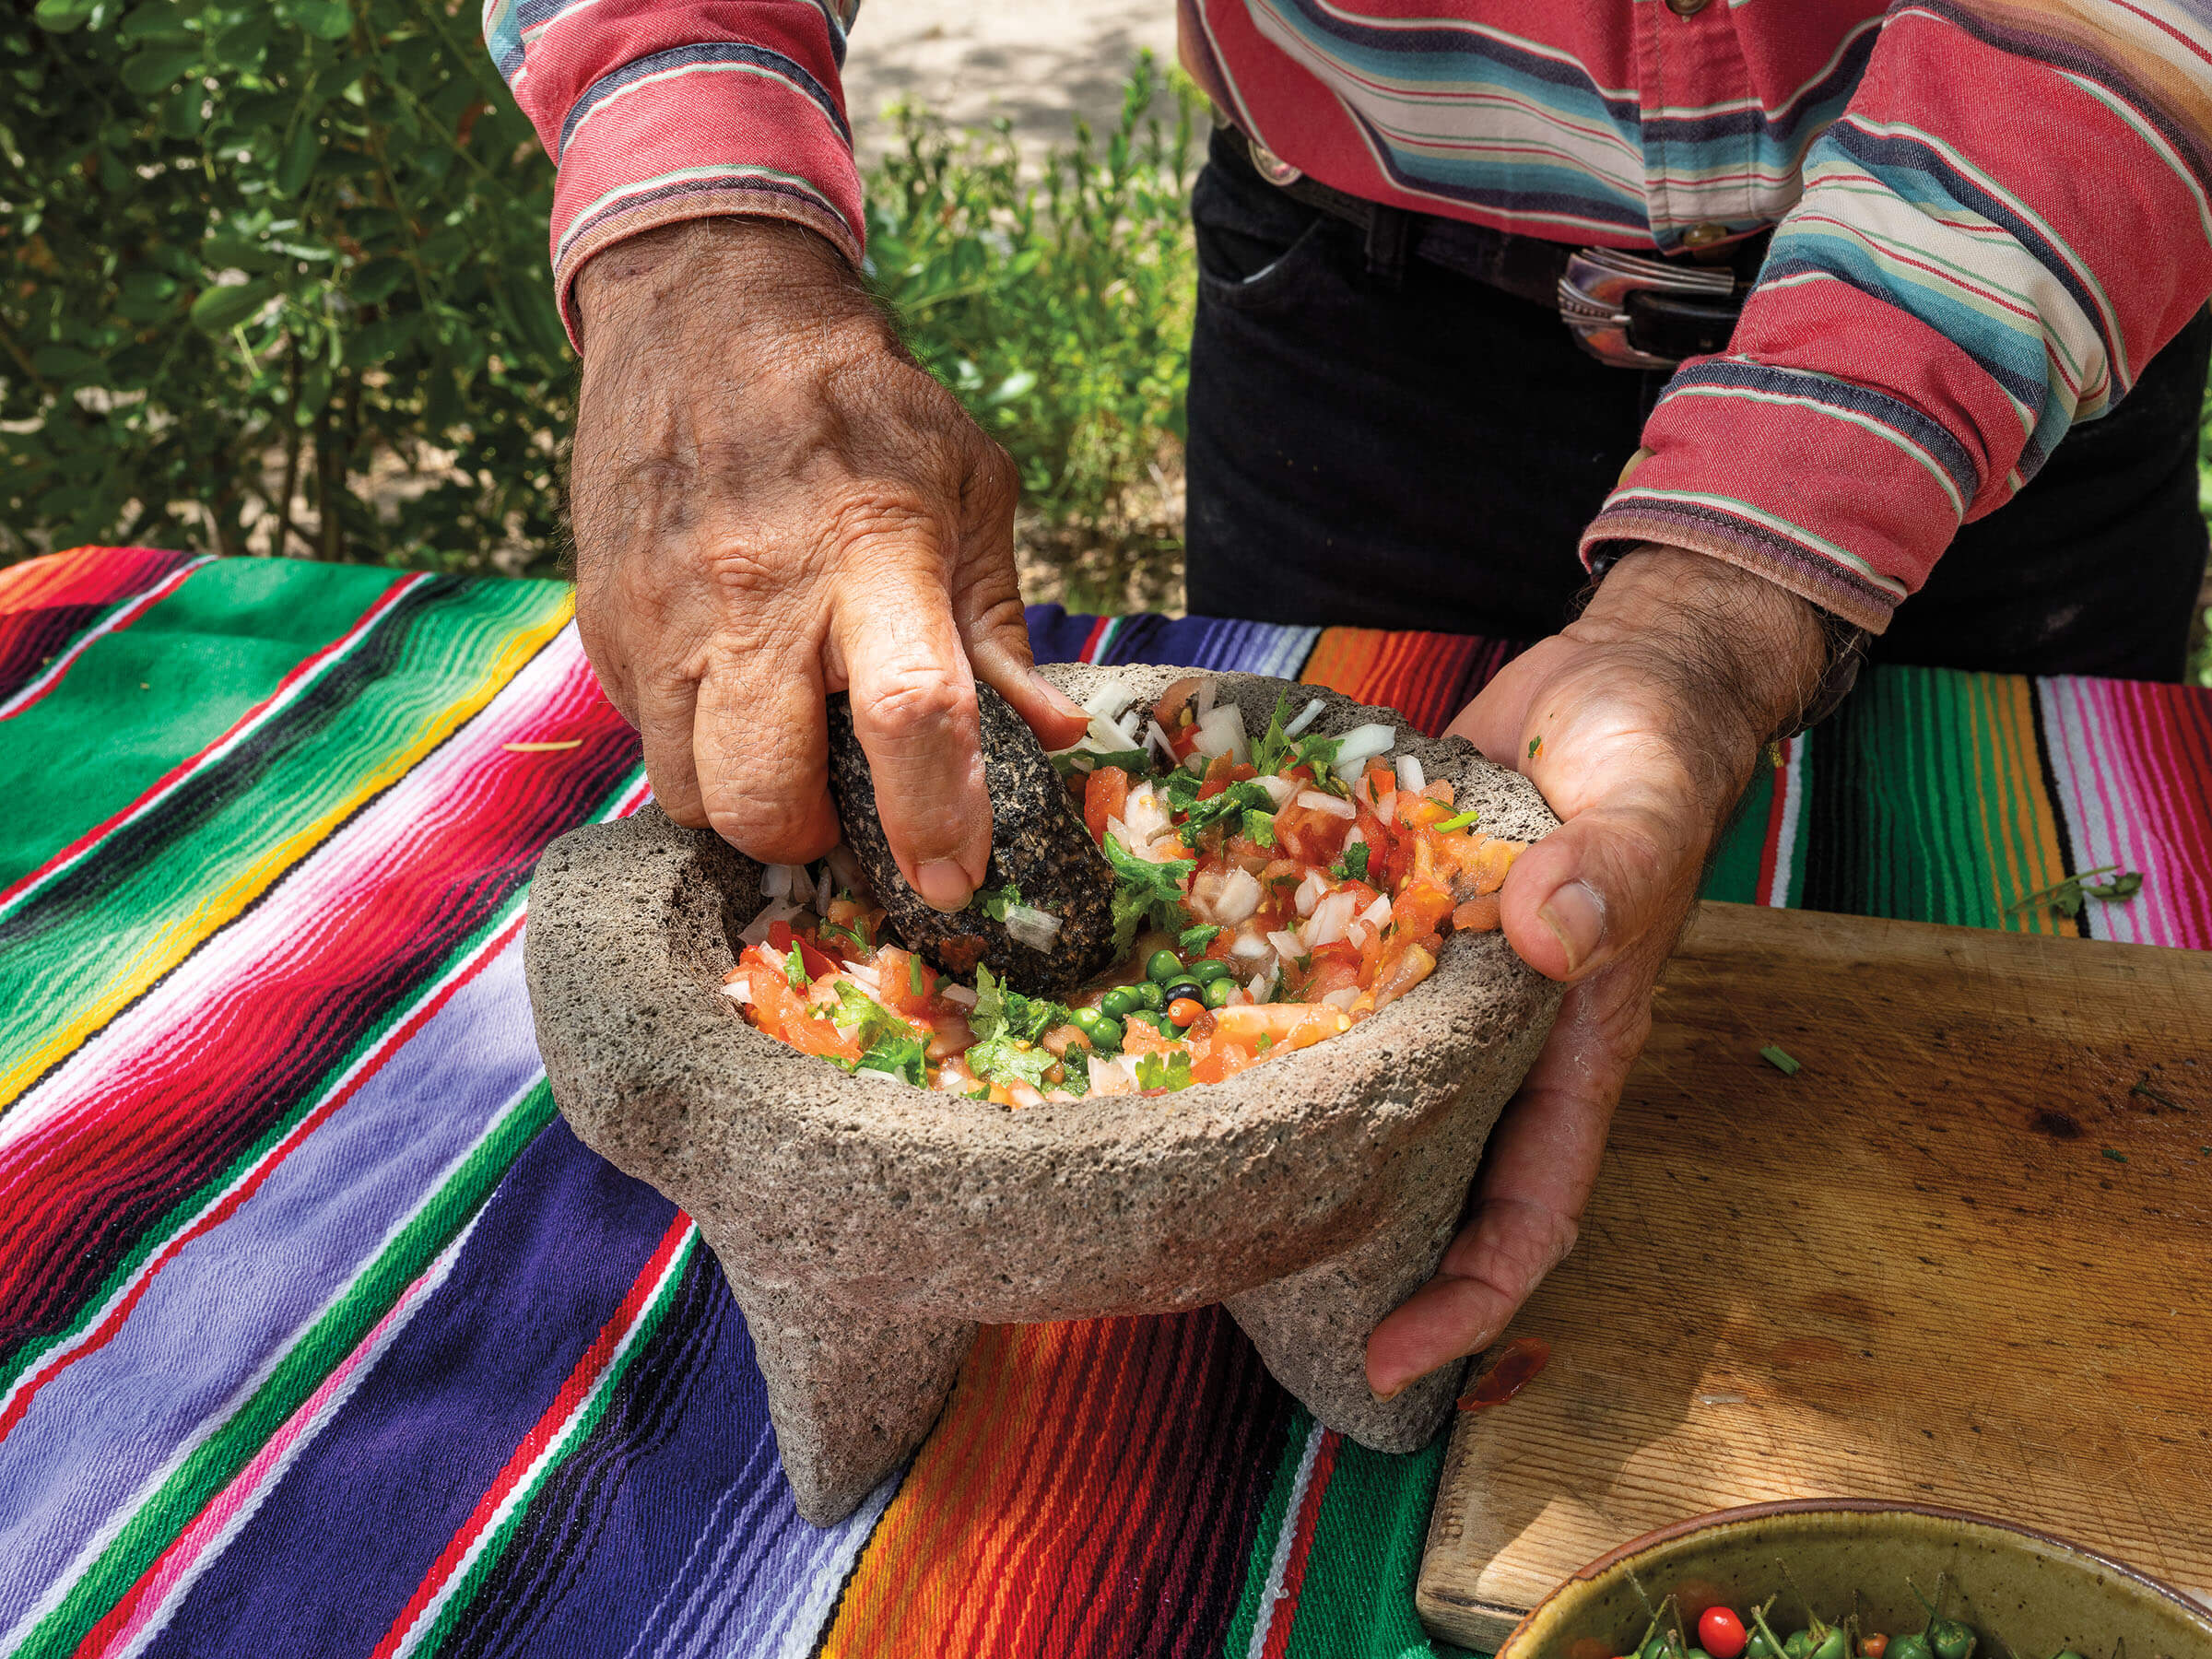 A man's hands mashes tomato, chile, and onion in a molcajete to make salsa